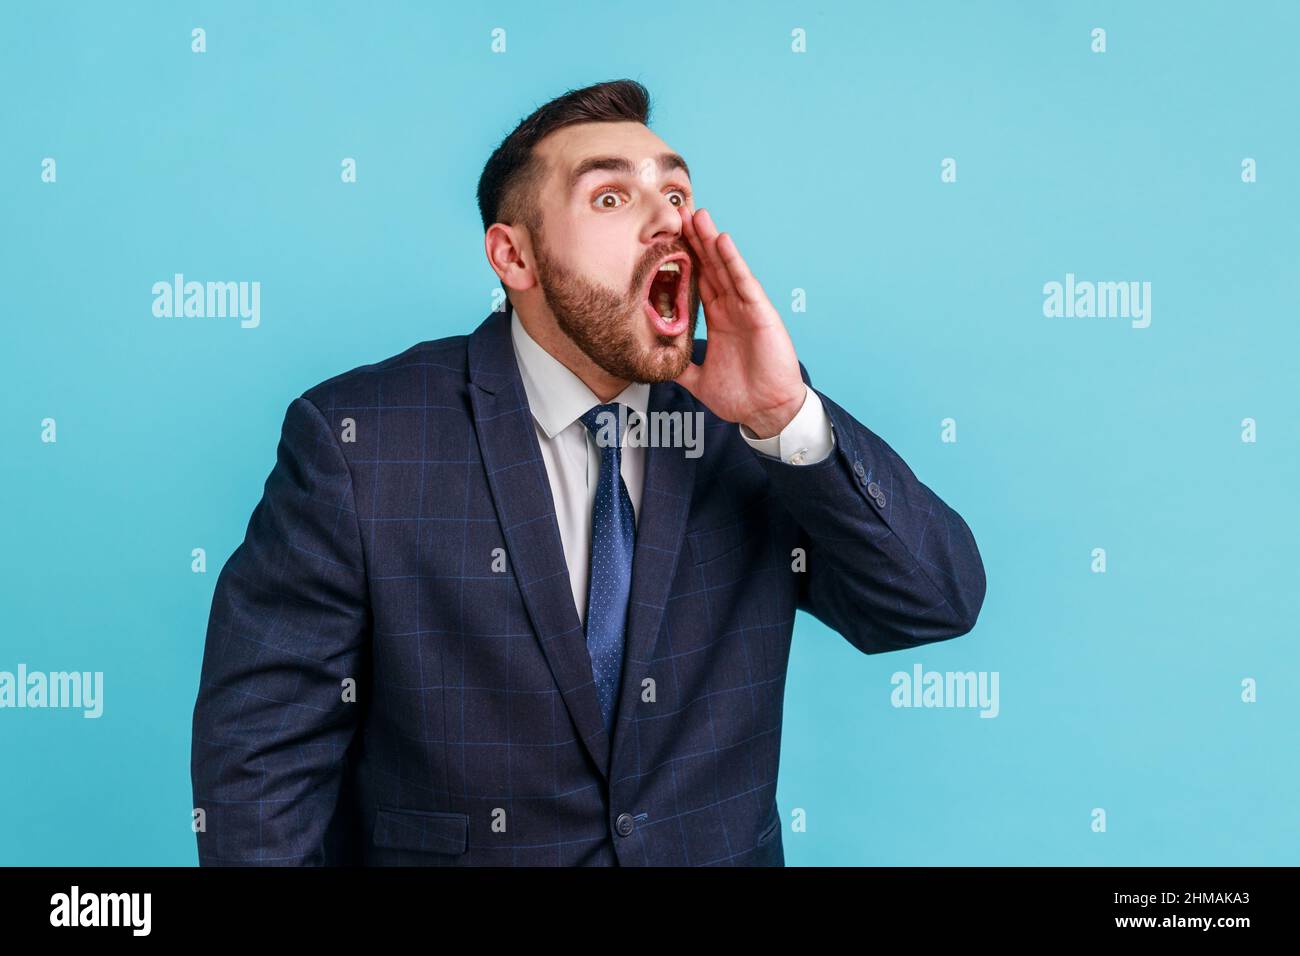 Profile portrait of handsome crazy businessman with beard wearing official style suit loudly screaming holding hand near widely opened mouth. Indoor studio shot isolated on blue background. Stock Photo